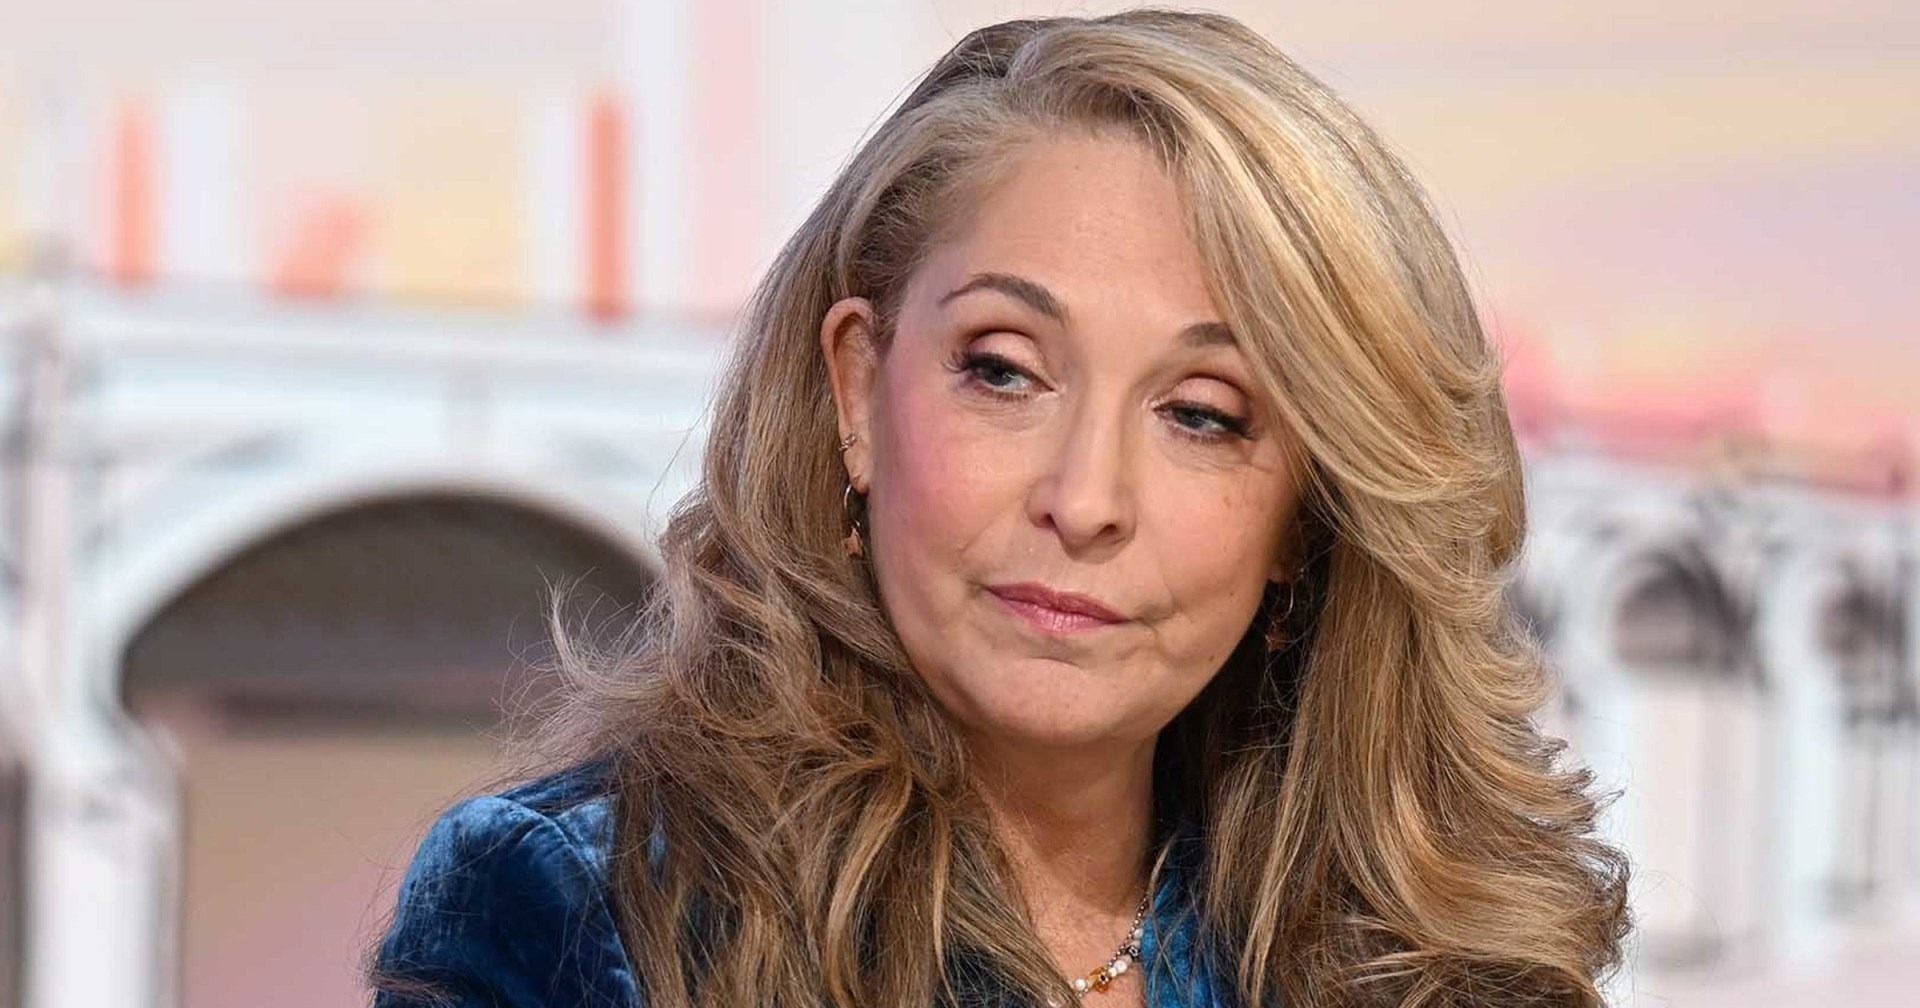 west end theatre increases security after tracy-ann oberman death threats over jewish role